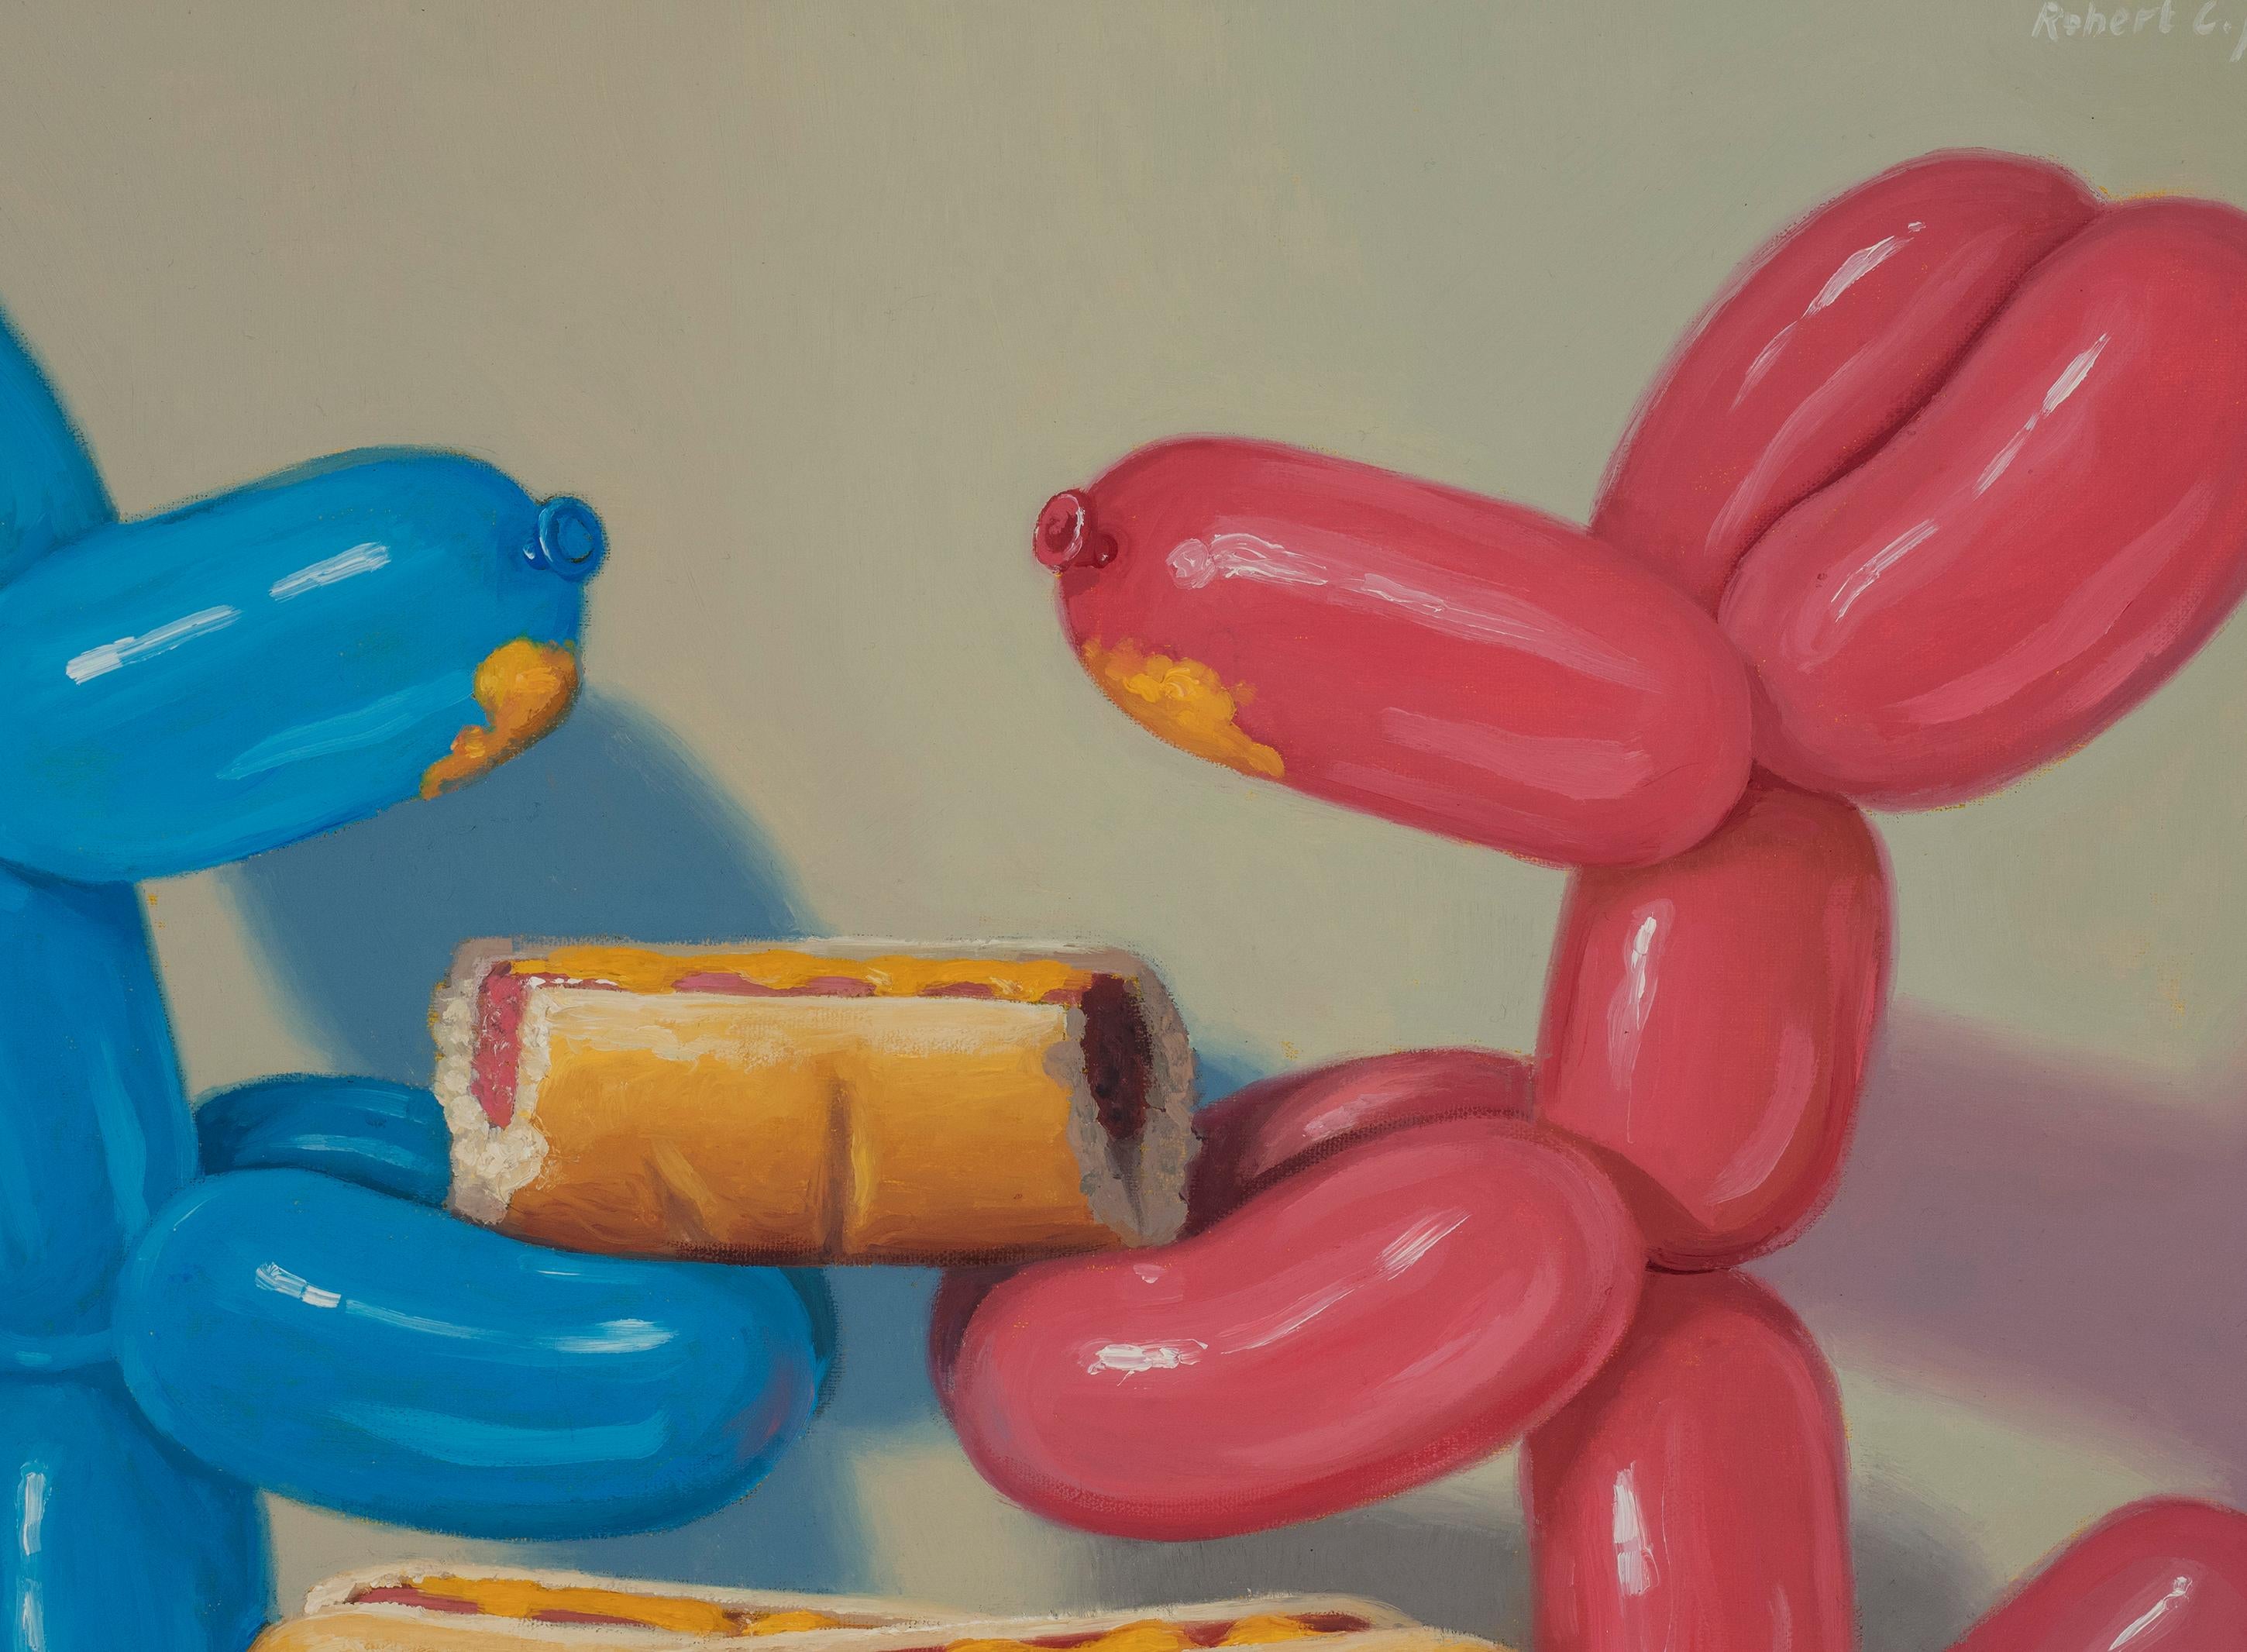 HOT DOGS, still life, balloon dogs, food, eating, playful, blue, pink - Contemporary Painting by Robert Jackson